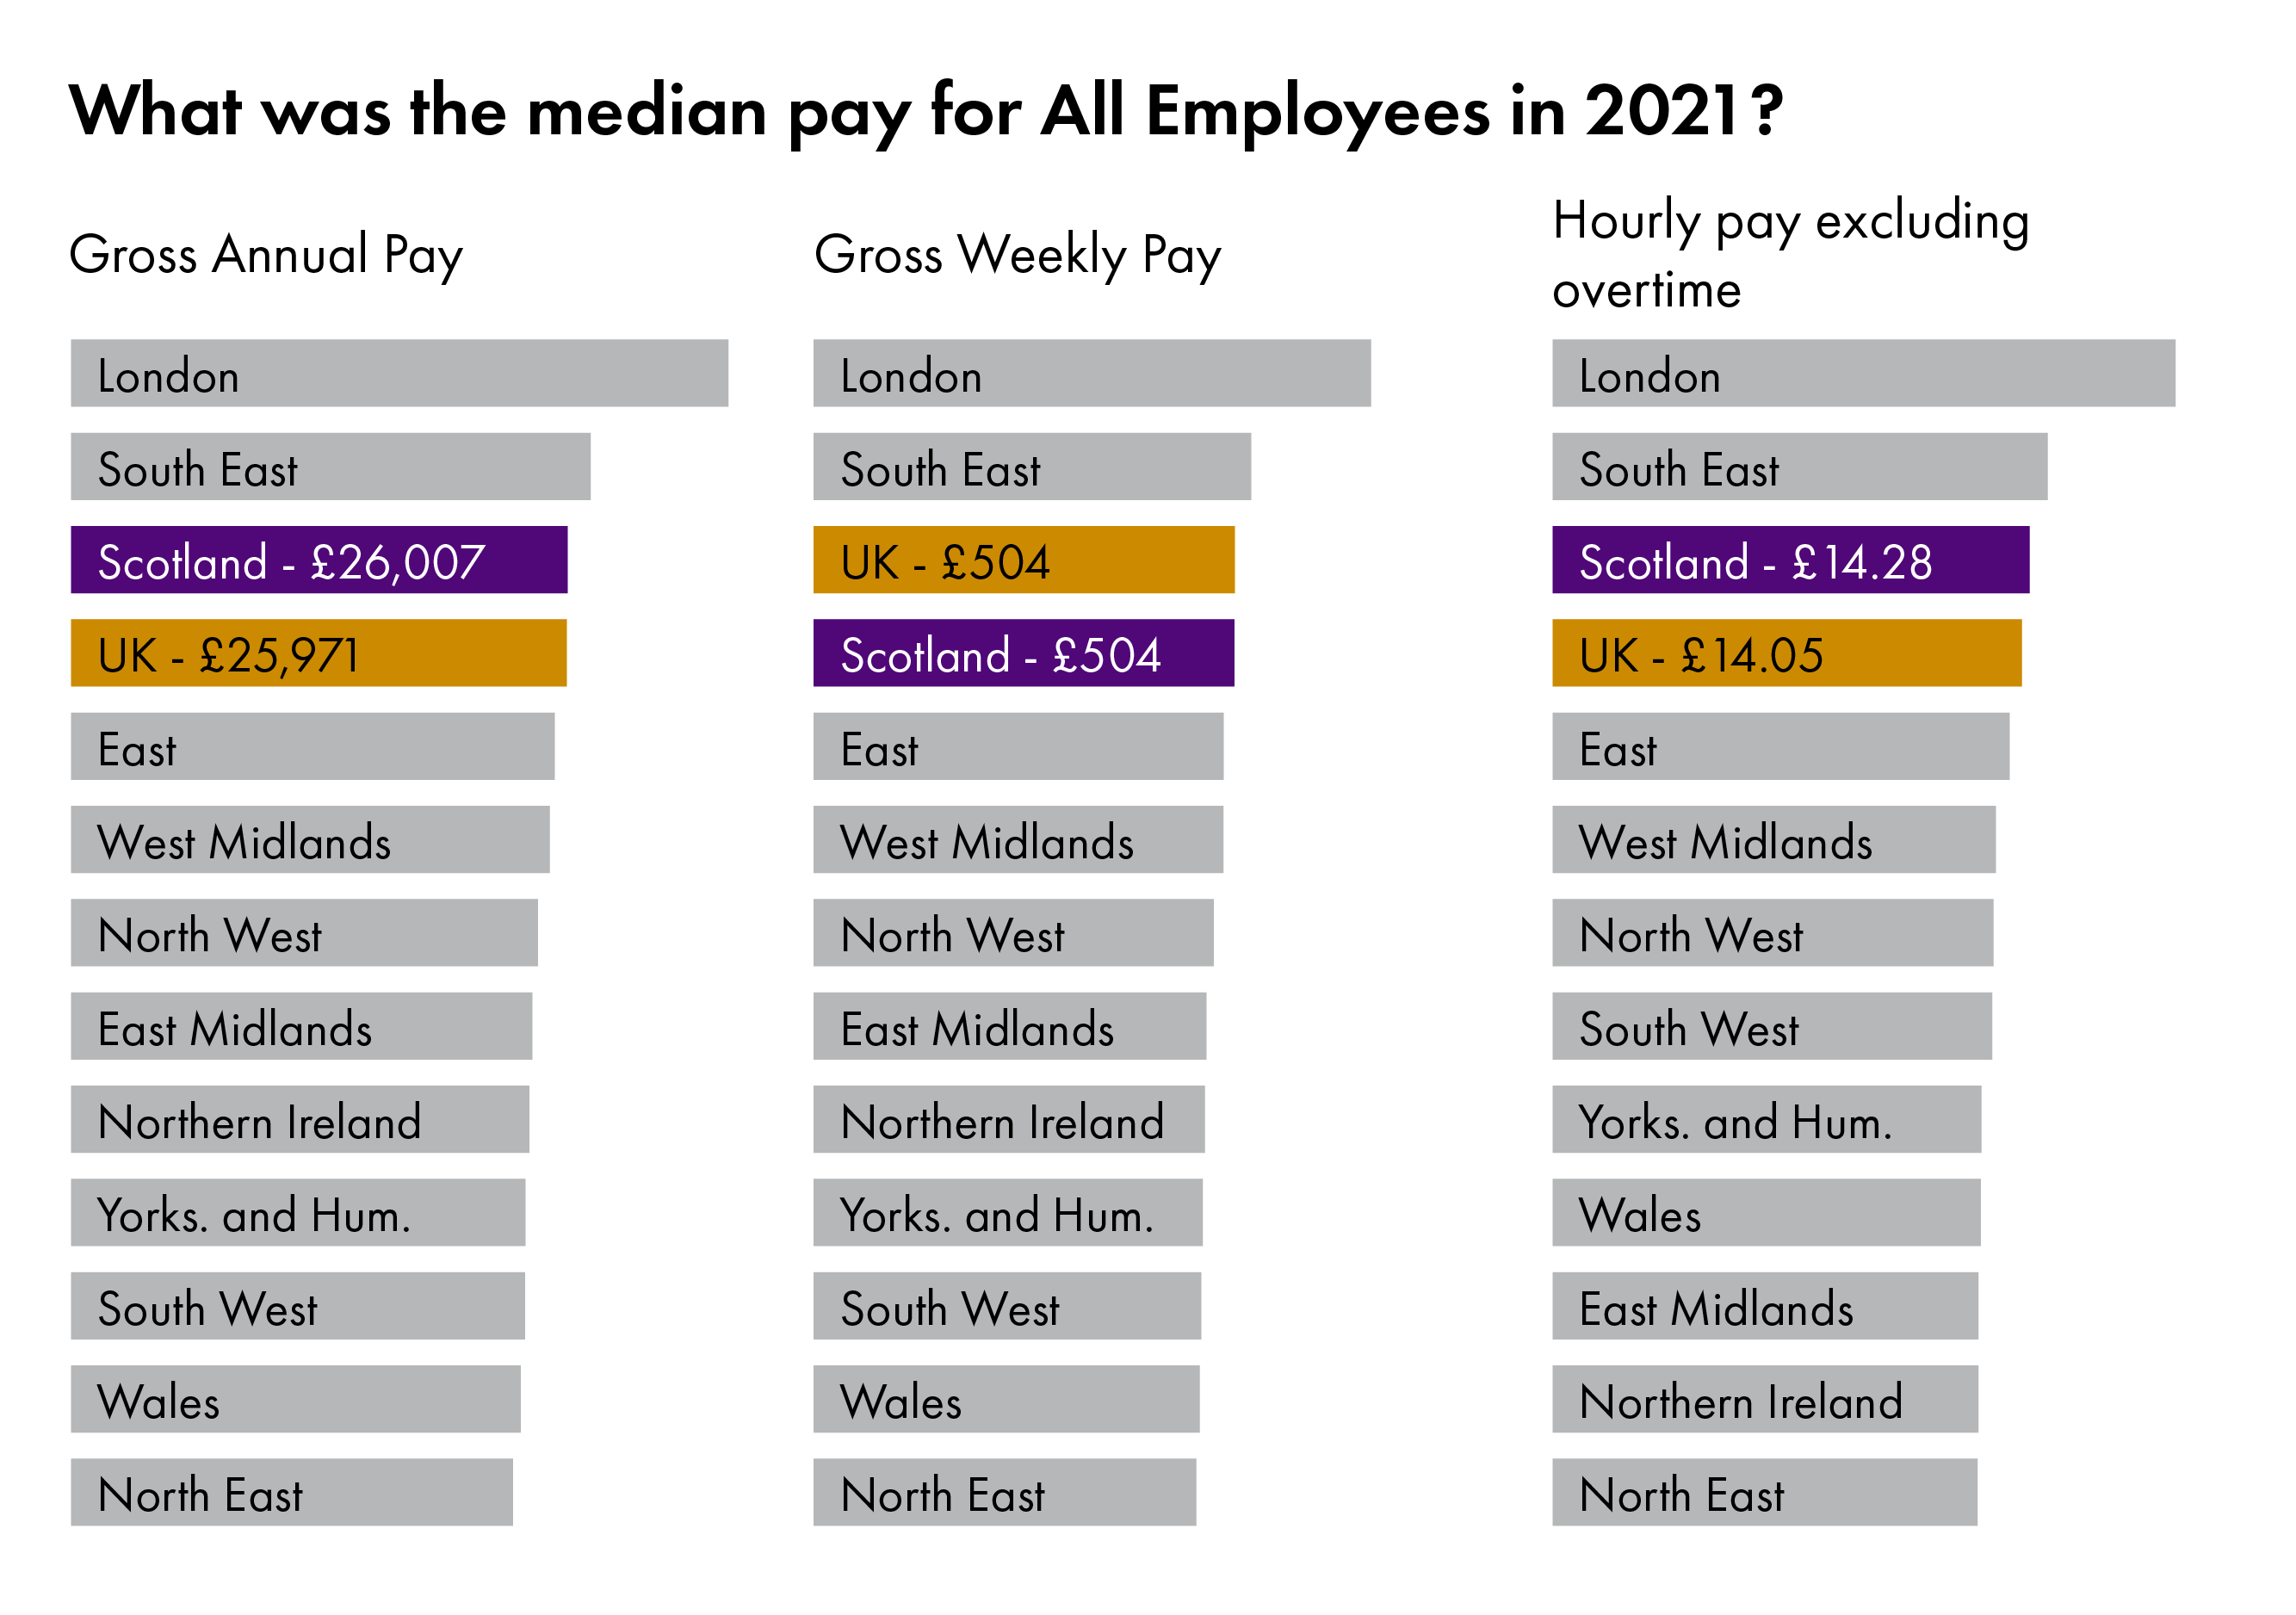 Three horizontal bar charts showing the value of pay for all employees by nation and region of the UK. One for gross annual pay, one for gross weekly pay and one for hourly pay excluding overtime. More detail can be found in the text below.